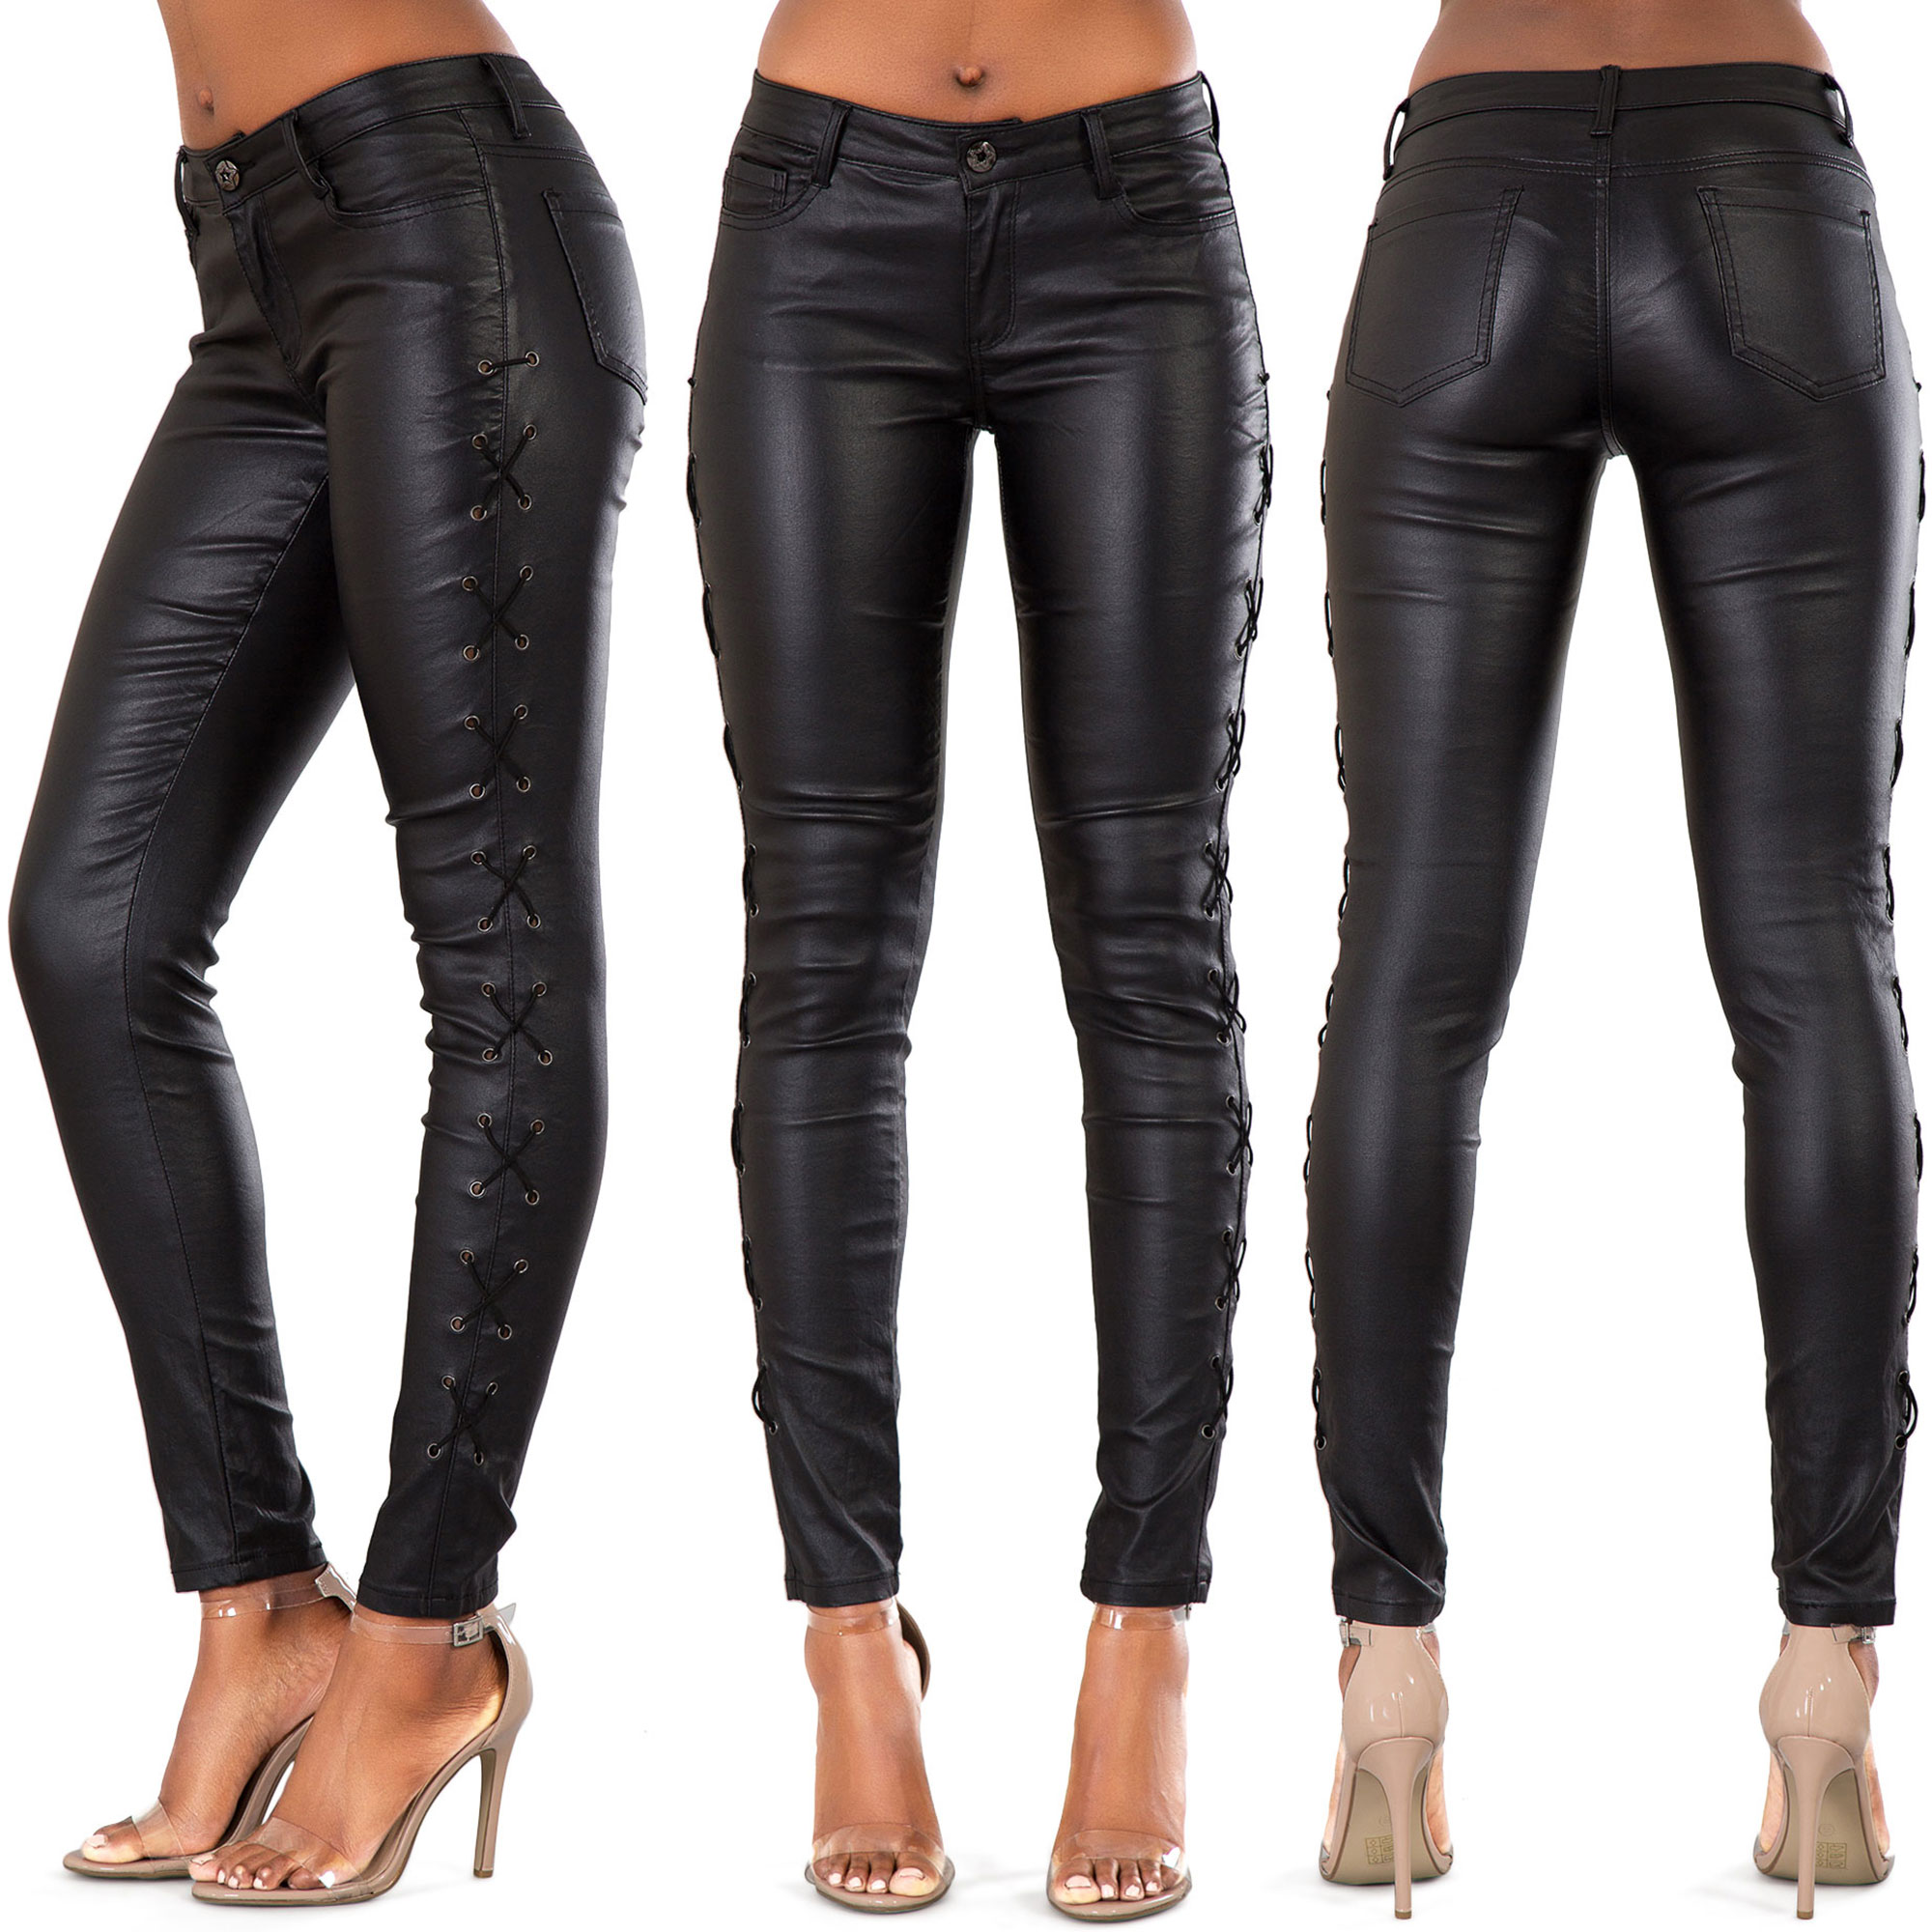 Women Black High Waist Leather Style Lace up Skinny Trousers Size 8 10 ...